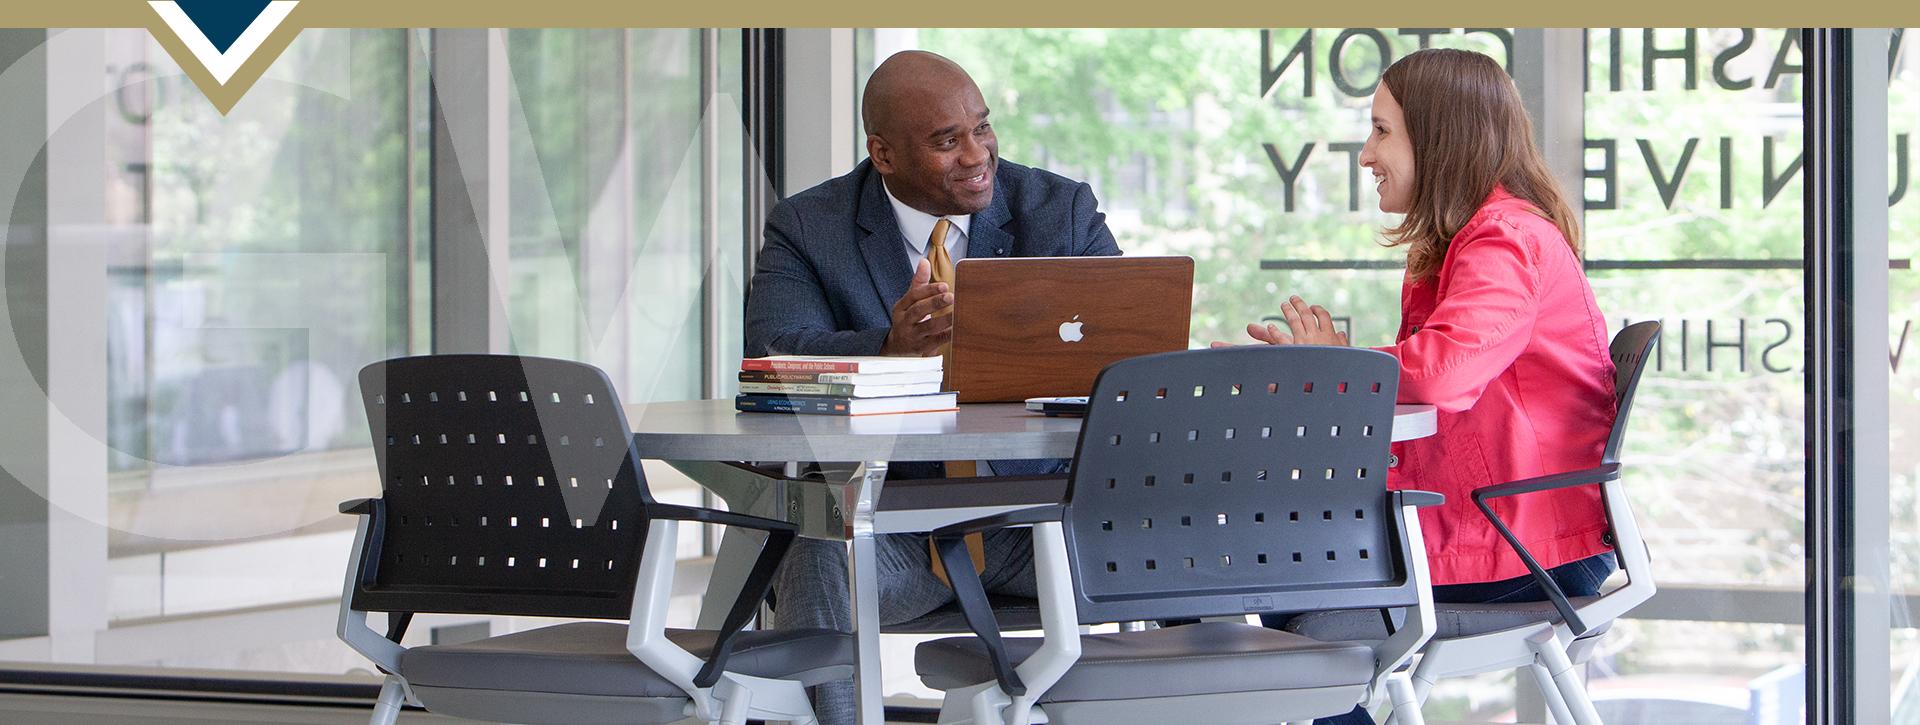 two professionals sit at table with laptop open between; GW logo on window